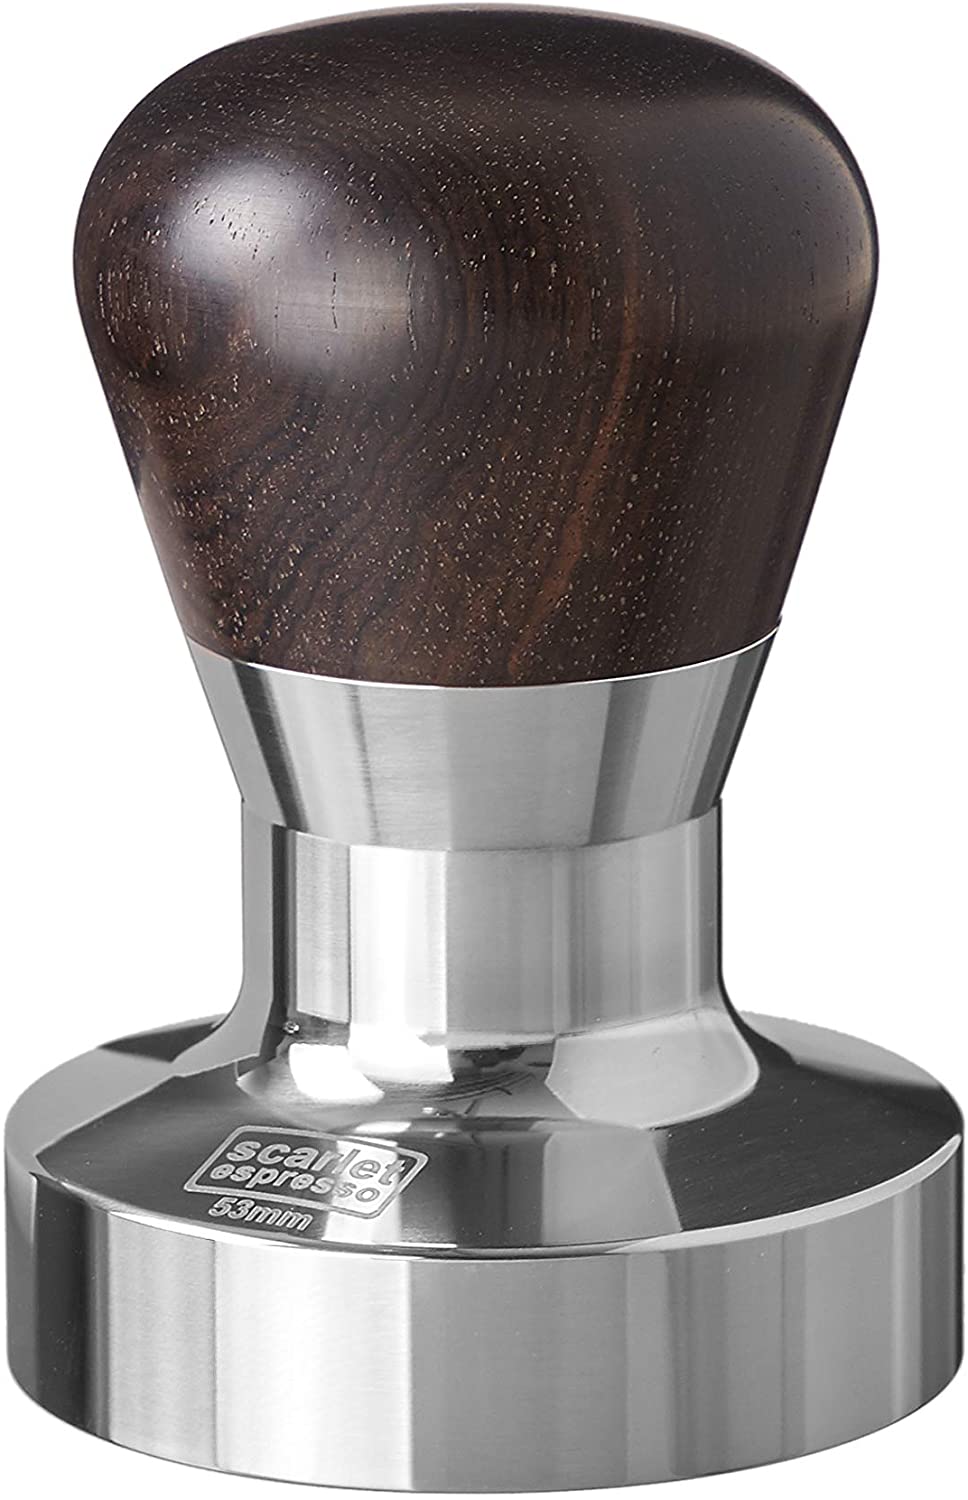 scarlet bijoux Scarlet Espresso Passion Tamper for Barista; with Ergonomic PVC or Precious Wood Handle of Choice and Precision Stainless Steel Base (53 mm)